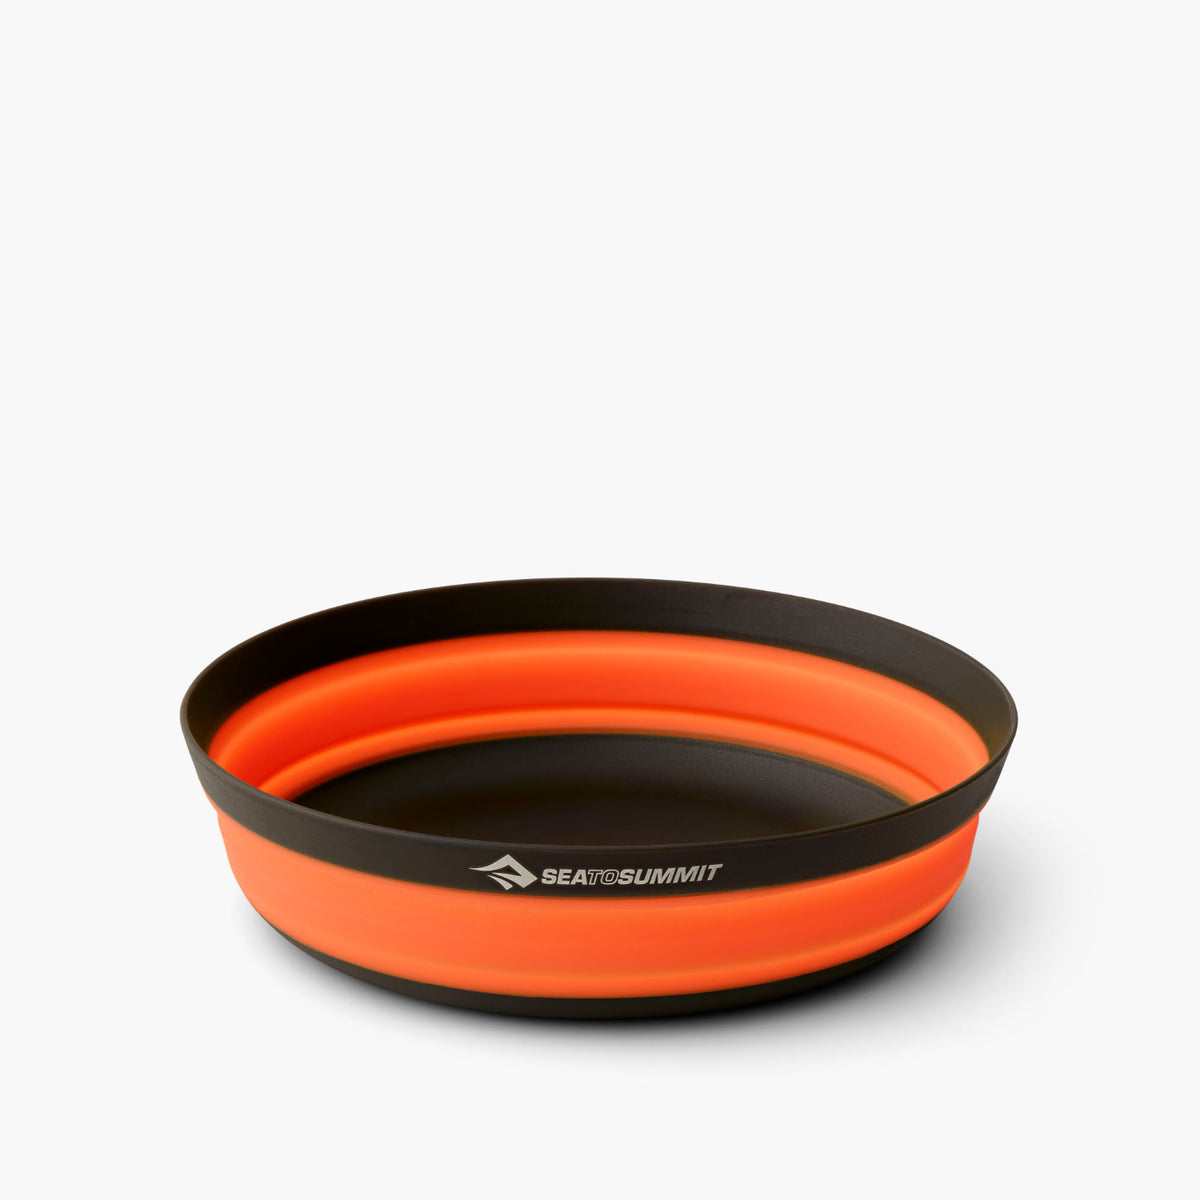 Sea to Summit Frontier Collapsible Bowl - Large in puffins bill orange